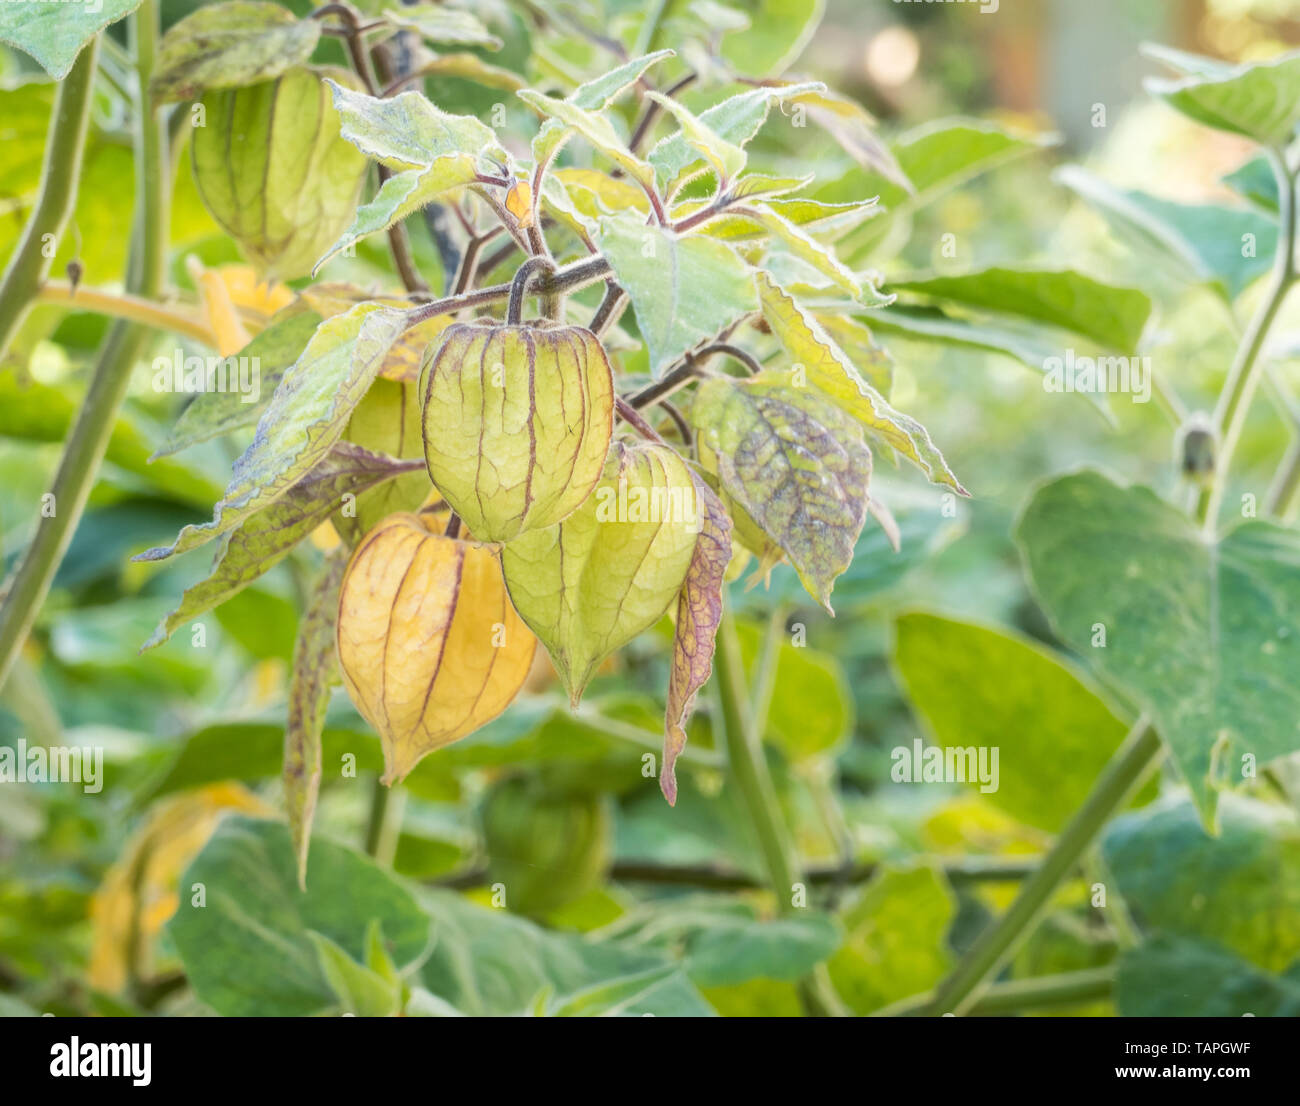 cape gooseberry or golden berry with fruits growing outdoor physalis peruviana Stock Photo